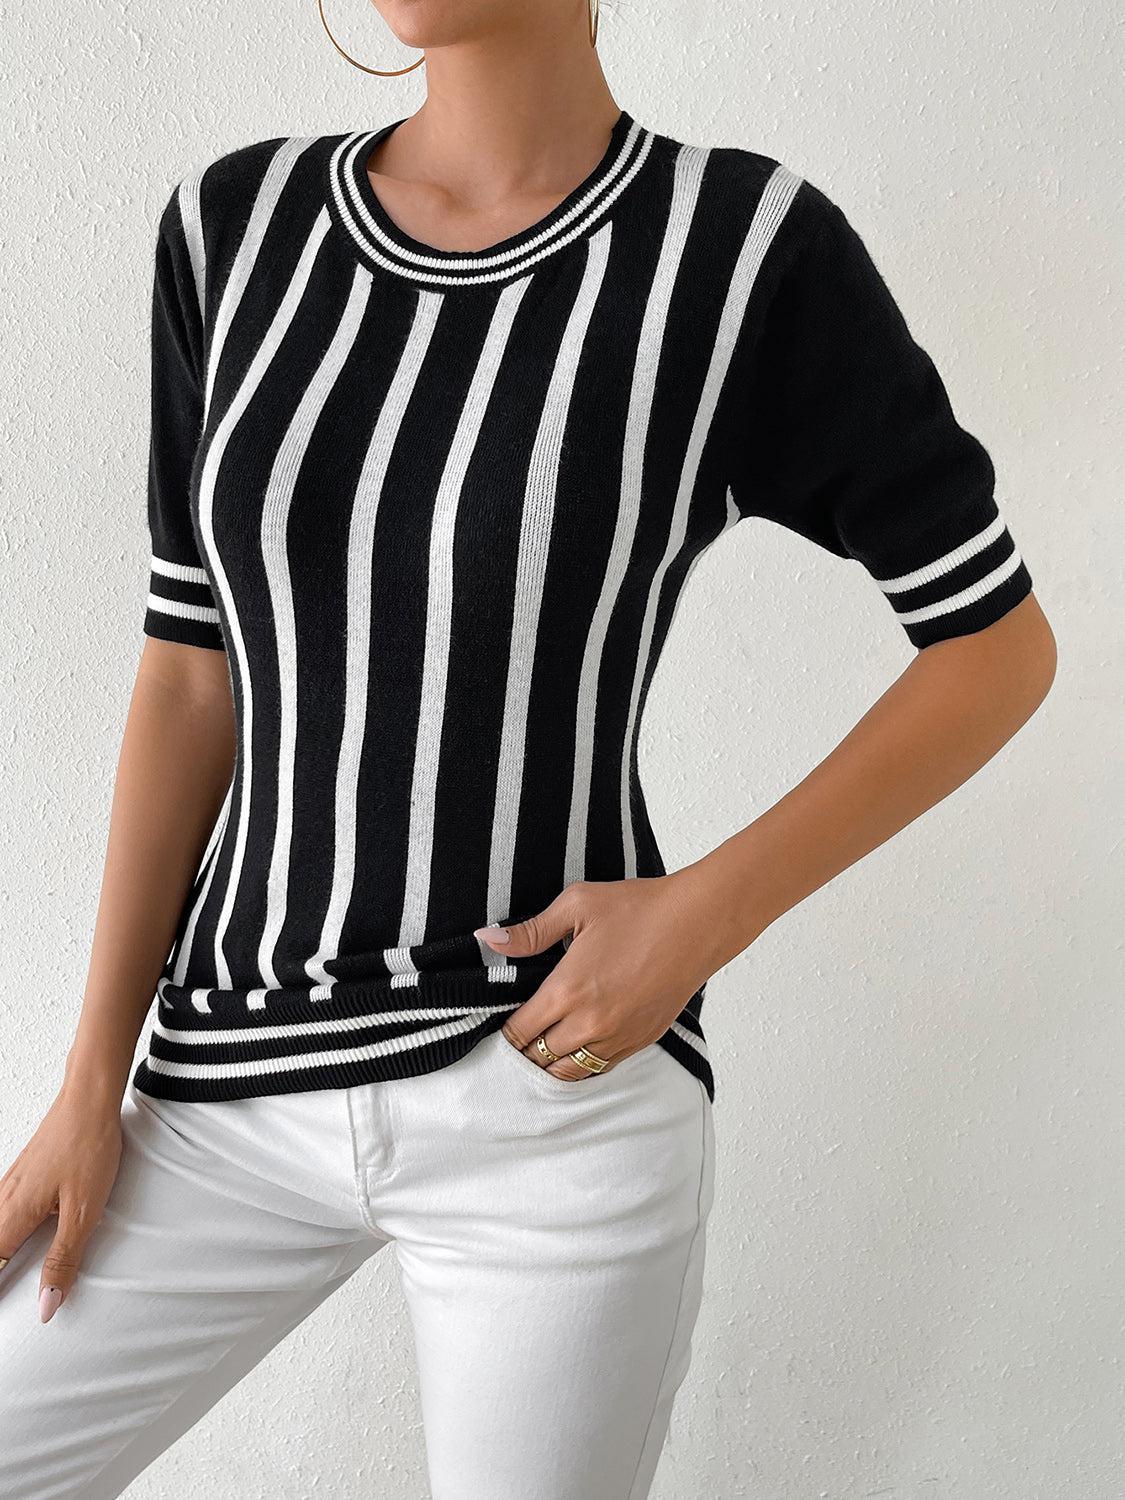 a woman wearing a black and white striped shirt